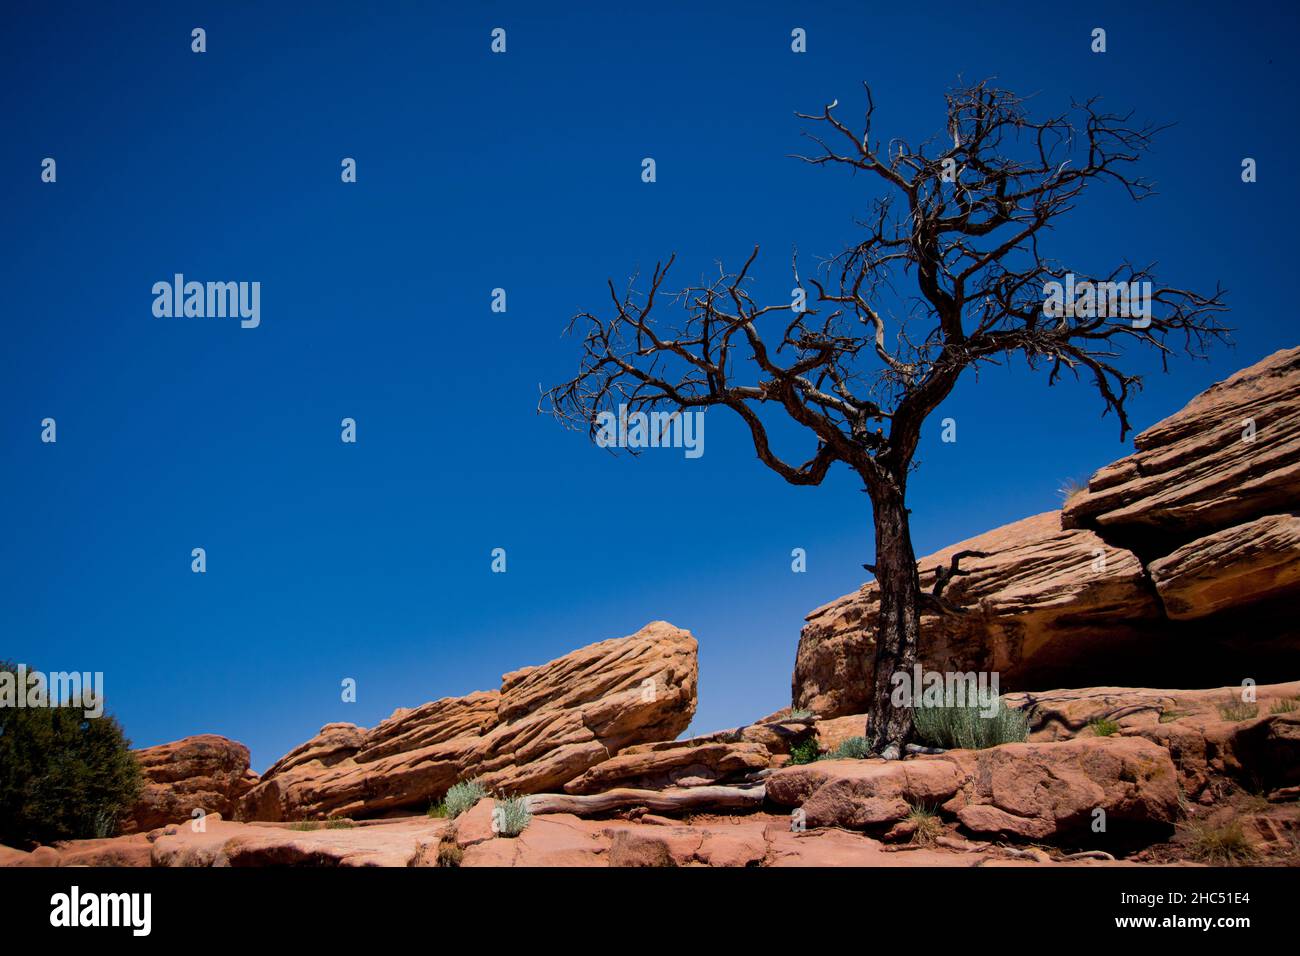 Lonely dead tree against the blue sky, Canyon de Chelly National Monument, Tsaile, Arizona, USA. Stock Photo